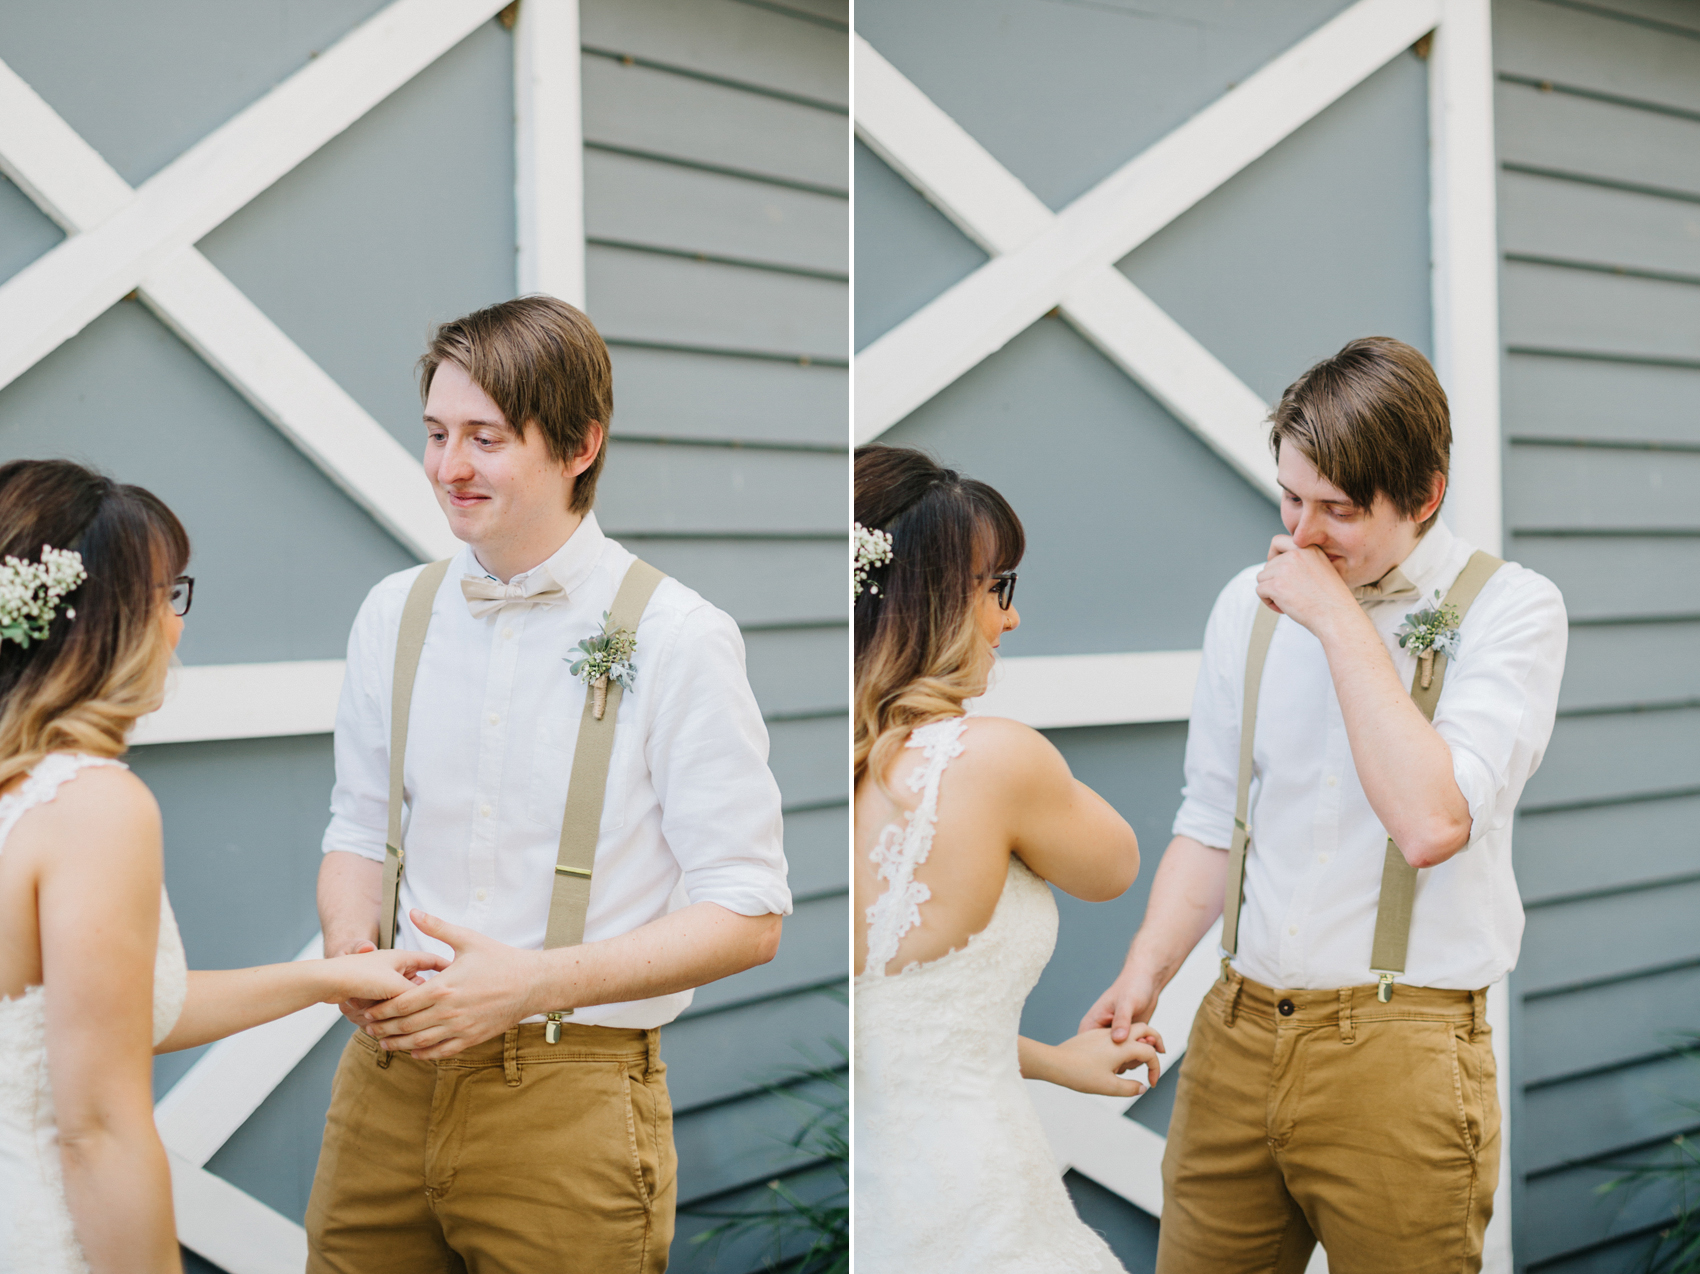 sweet first look with the groom having an emotional reaction